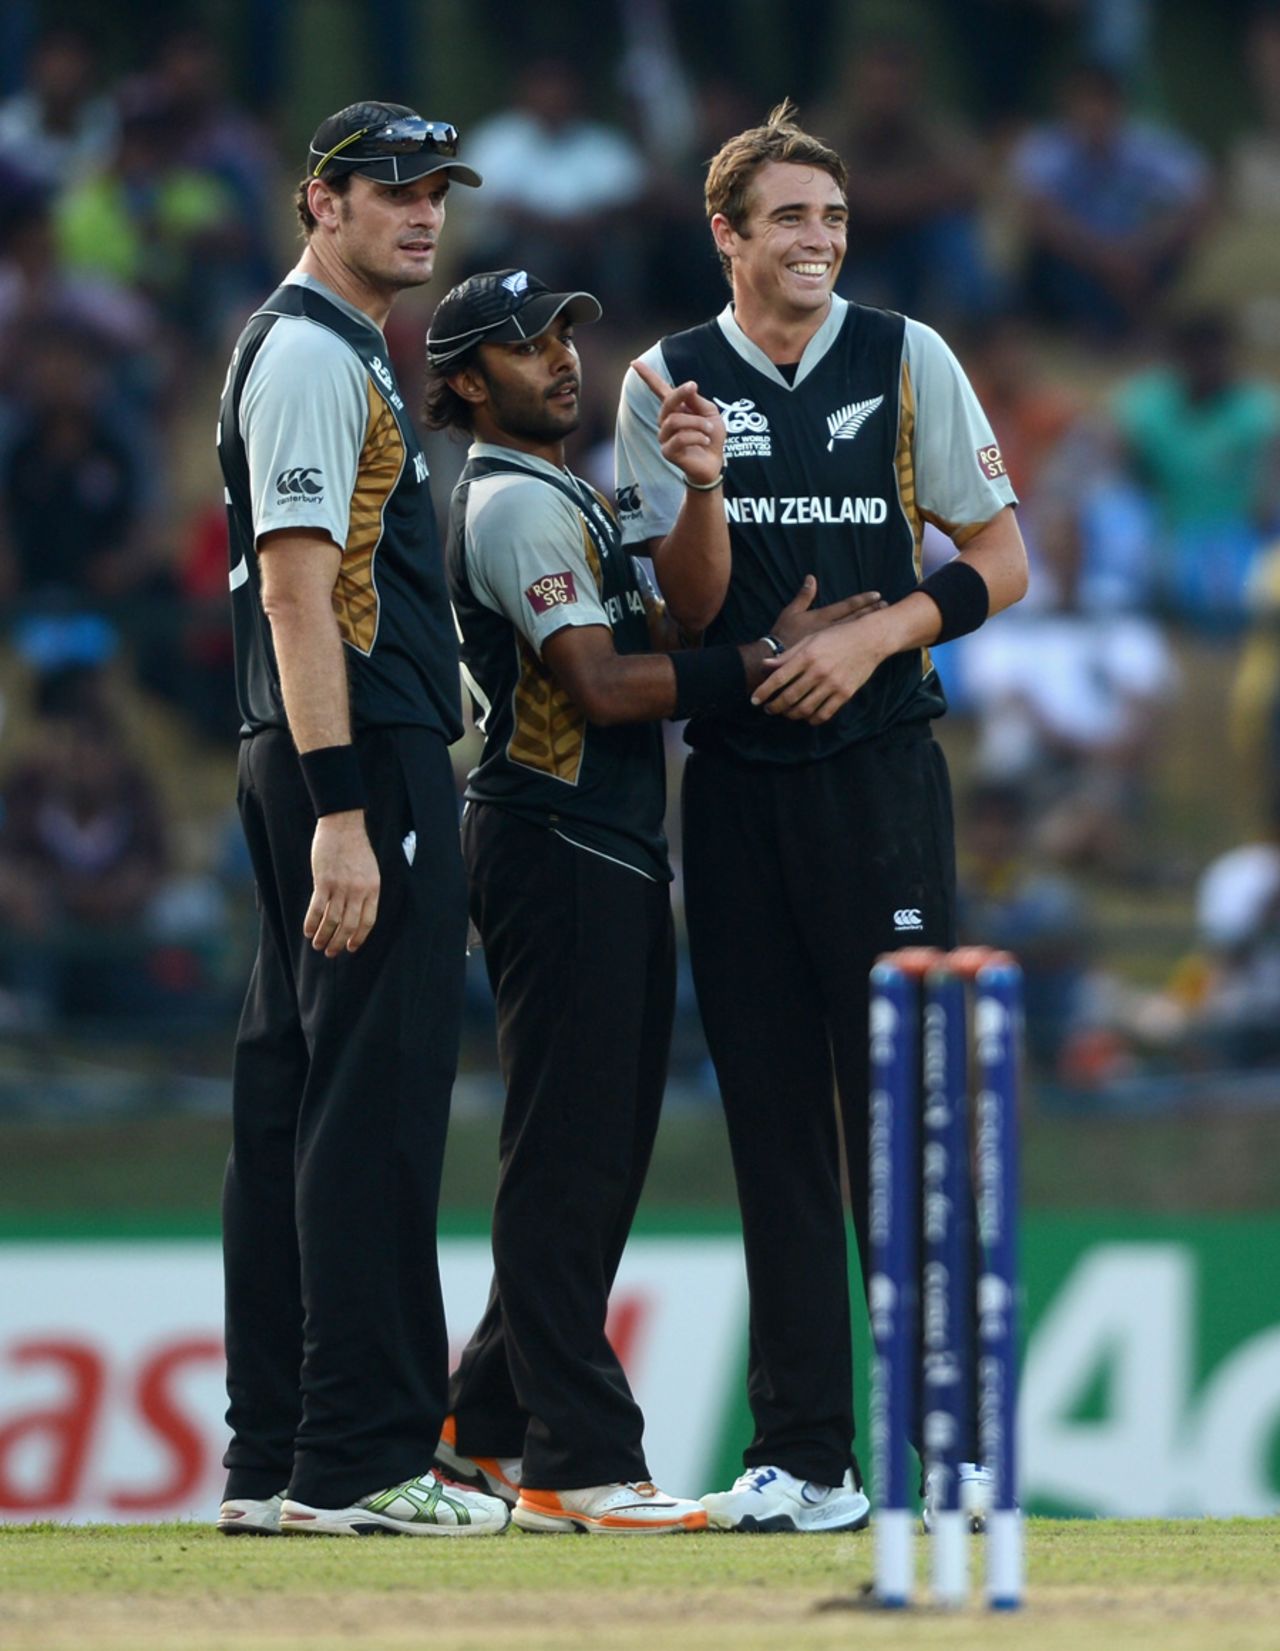 Tim Southee celebrates a wicket with Ronnie Hira and Kyle Mills, New Zealand v West Indies, Super Eights, World Twenty20 2012, Pallekele, October 1, 2012